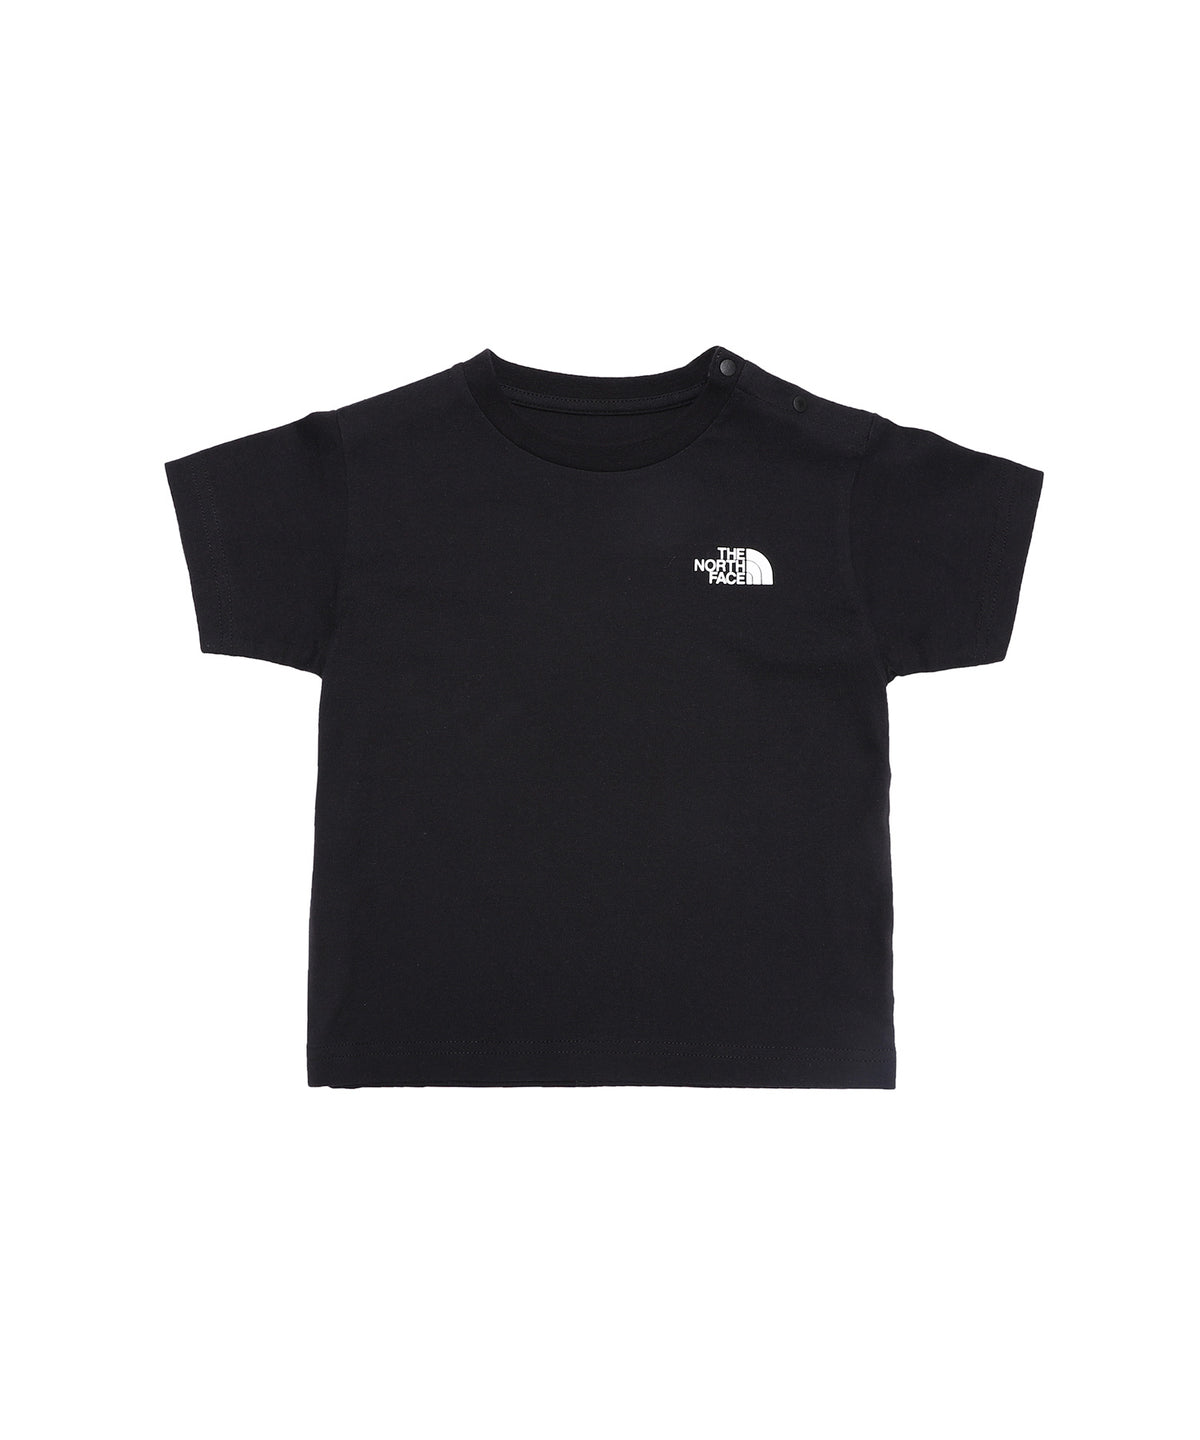 Baby S/S Back Square Logo Tee